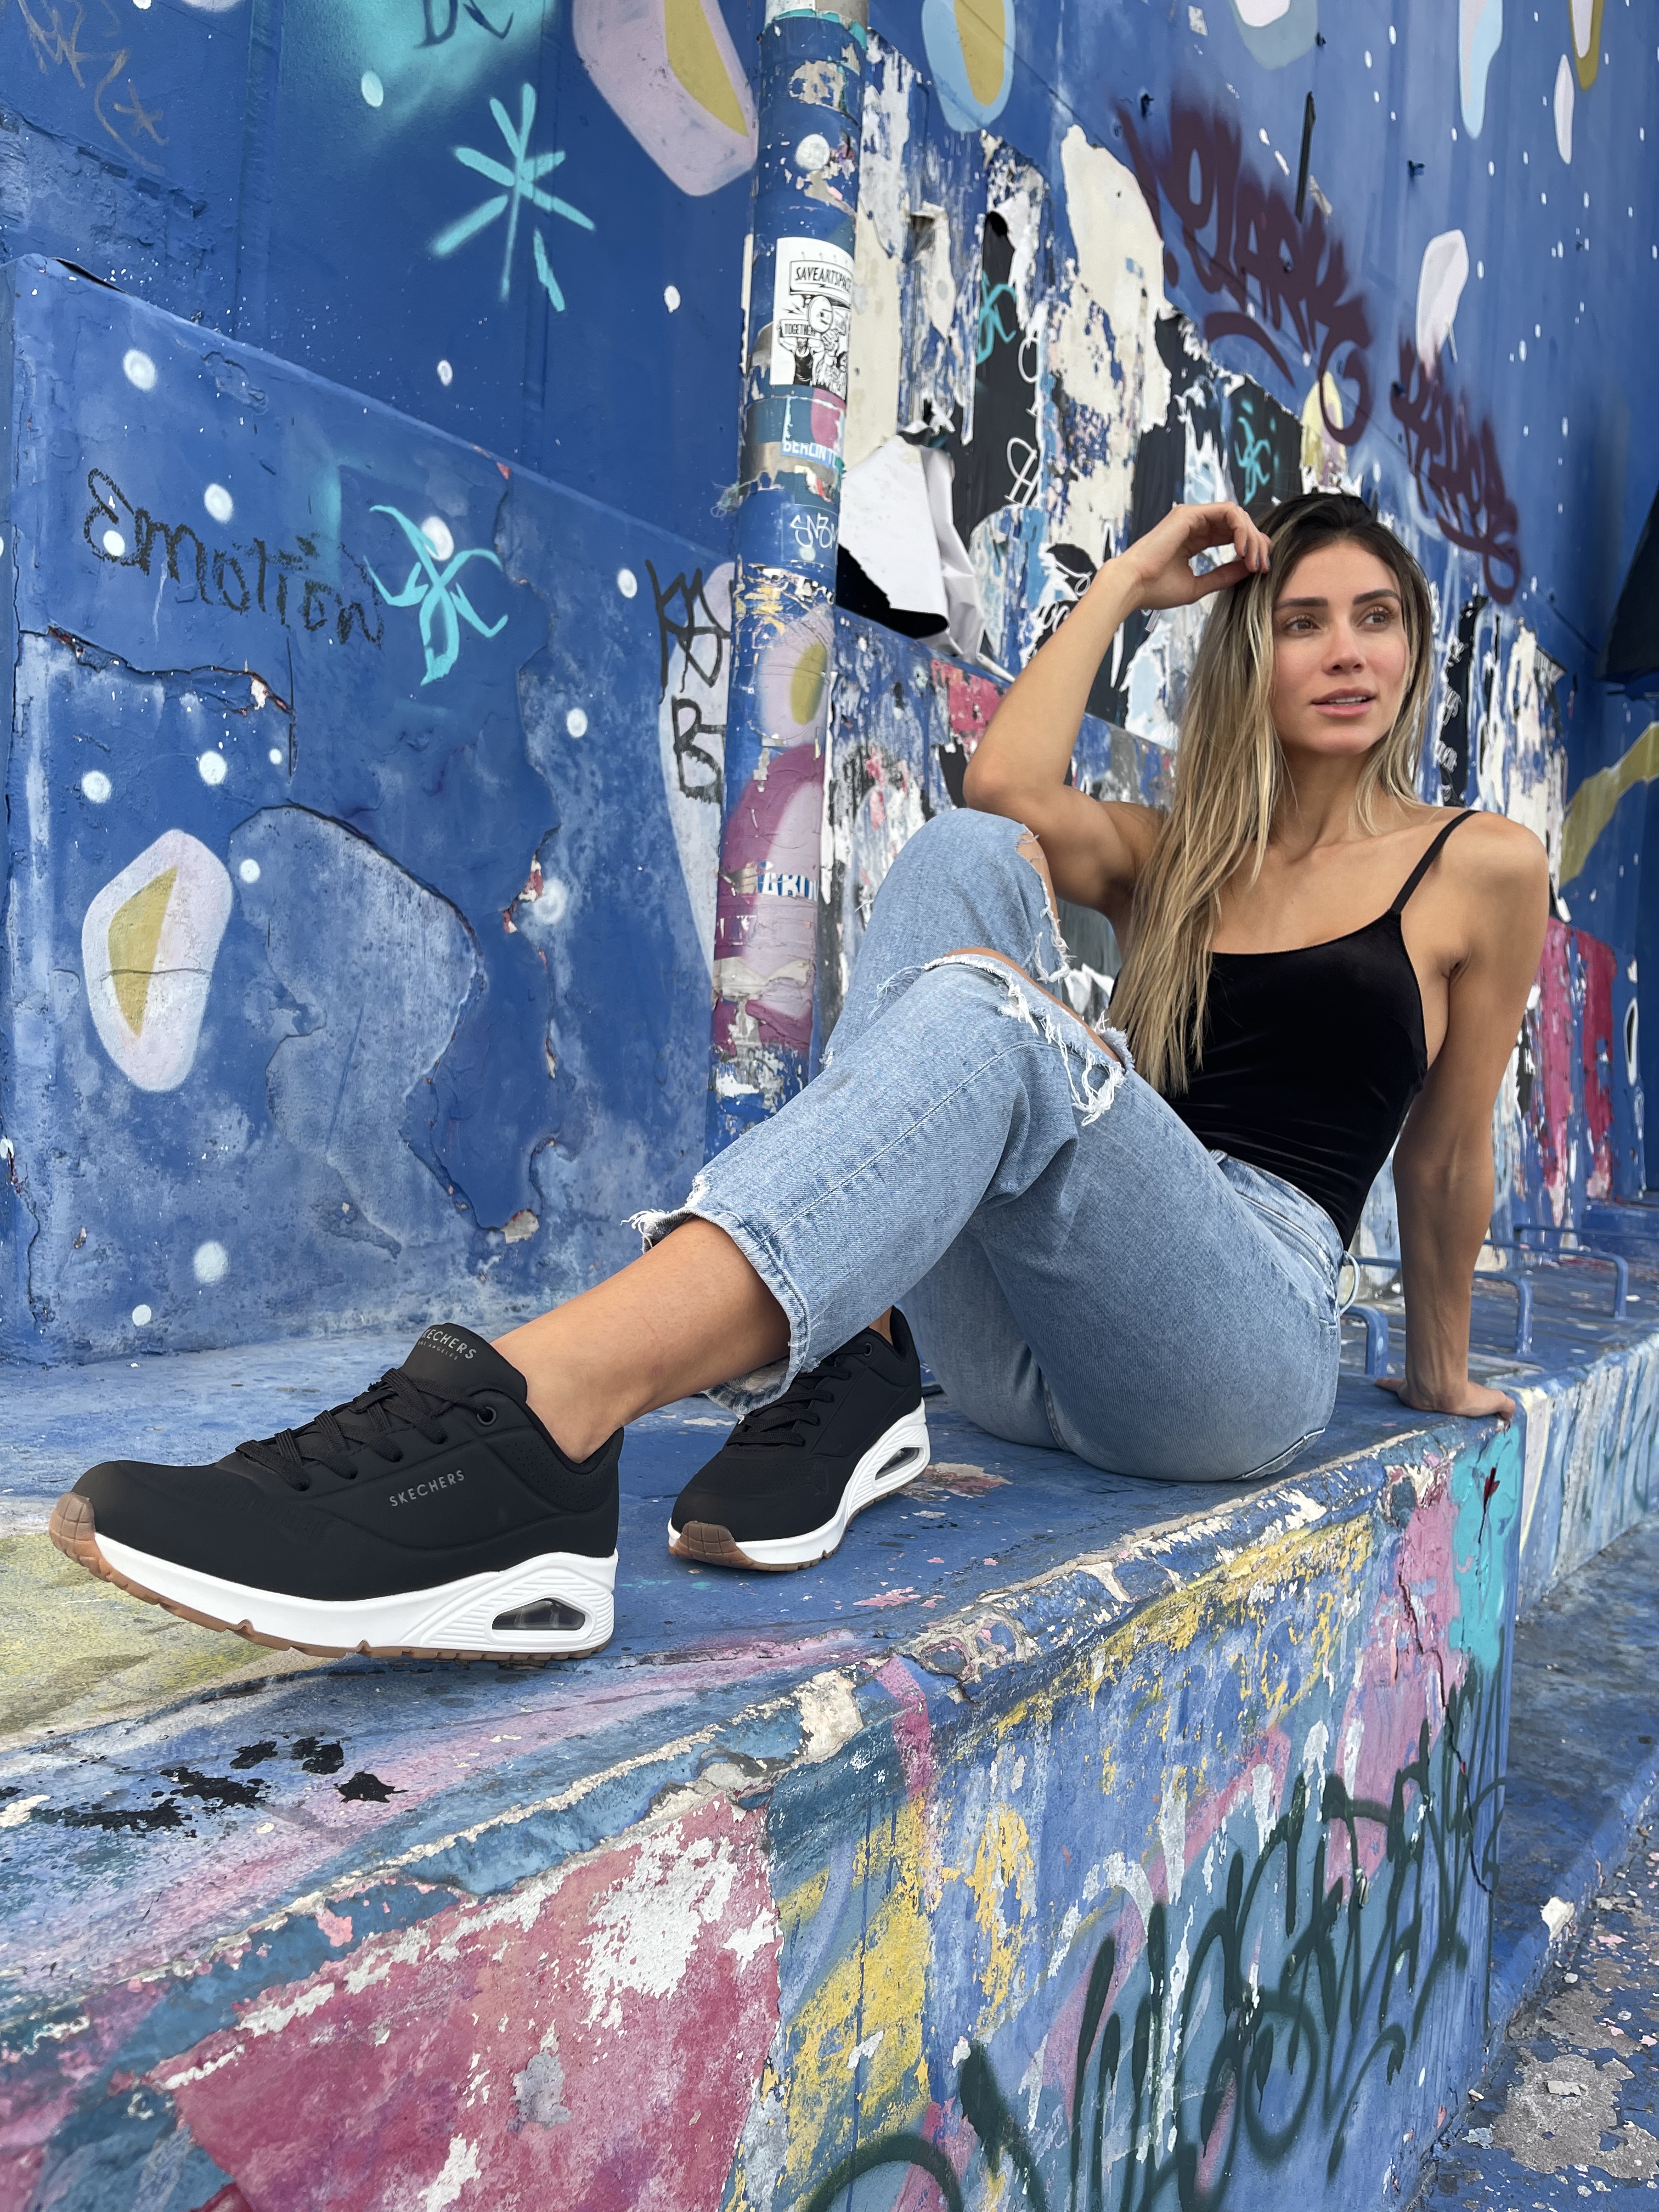 Skechers Kenya on Twitter: "Skechers Uno got that smooth clean leather-textured synthetic with Air-Cooled Memory insole #fashion #skechers #skecherske @linacardona41 https://t.co/a1hfdz4t6U" / Twitter